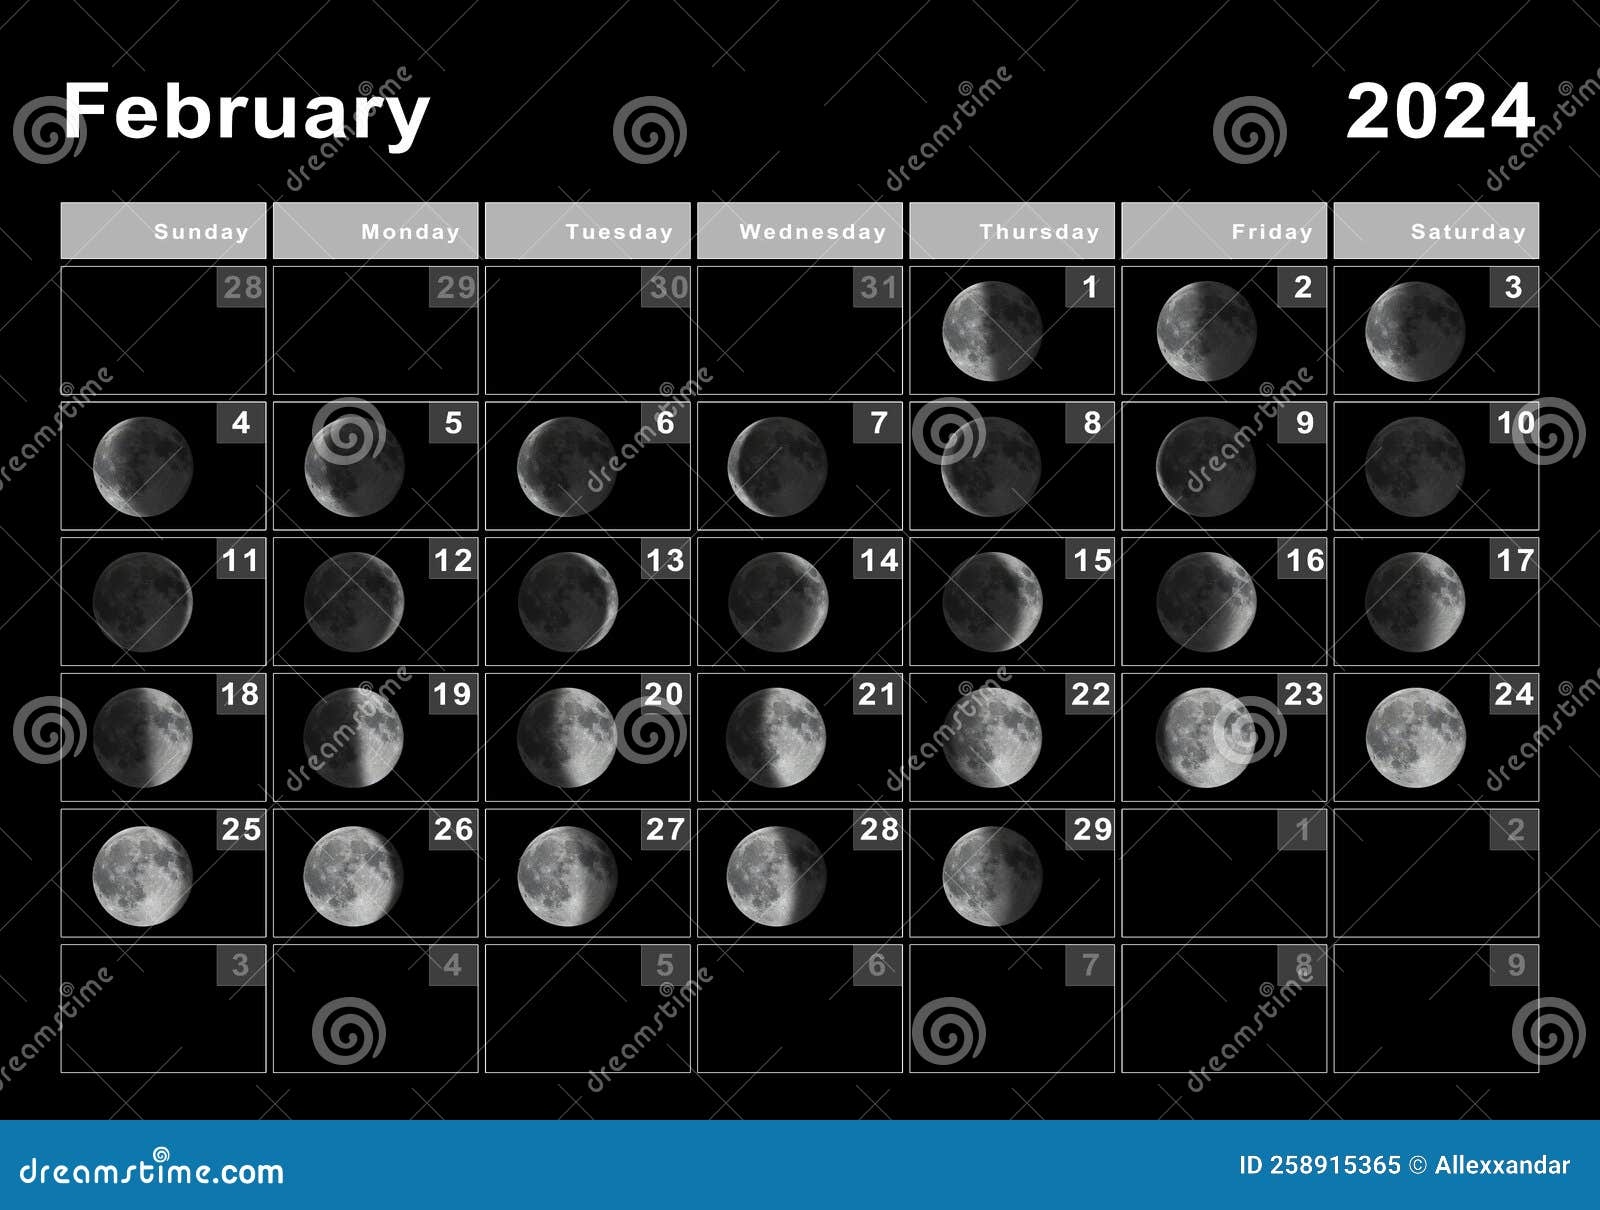 February 2024 Lunar Calendar Moon Cycles Stock Illustration - Free Printable 2024 Calendar With Moon Phases Cosmic Events